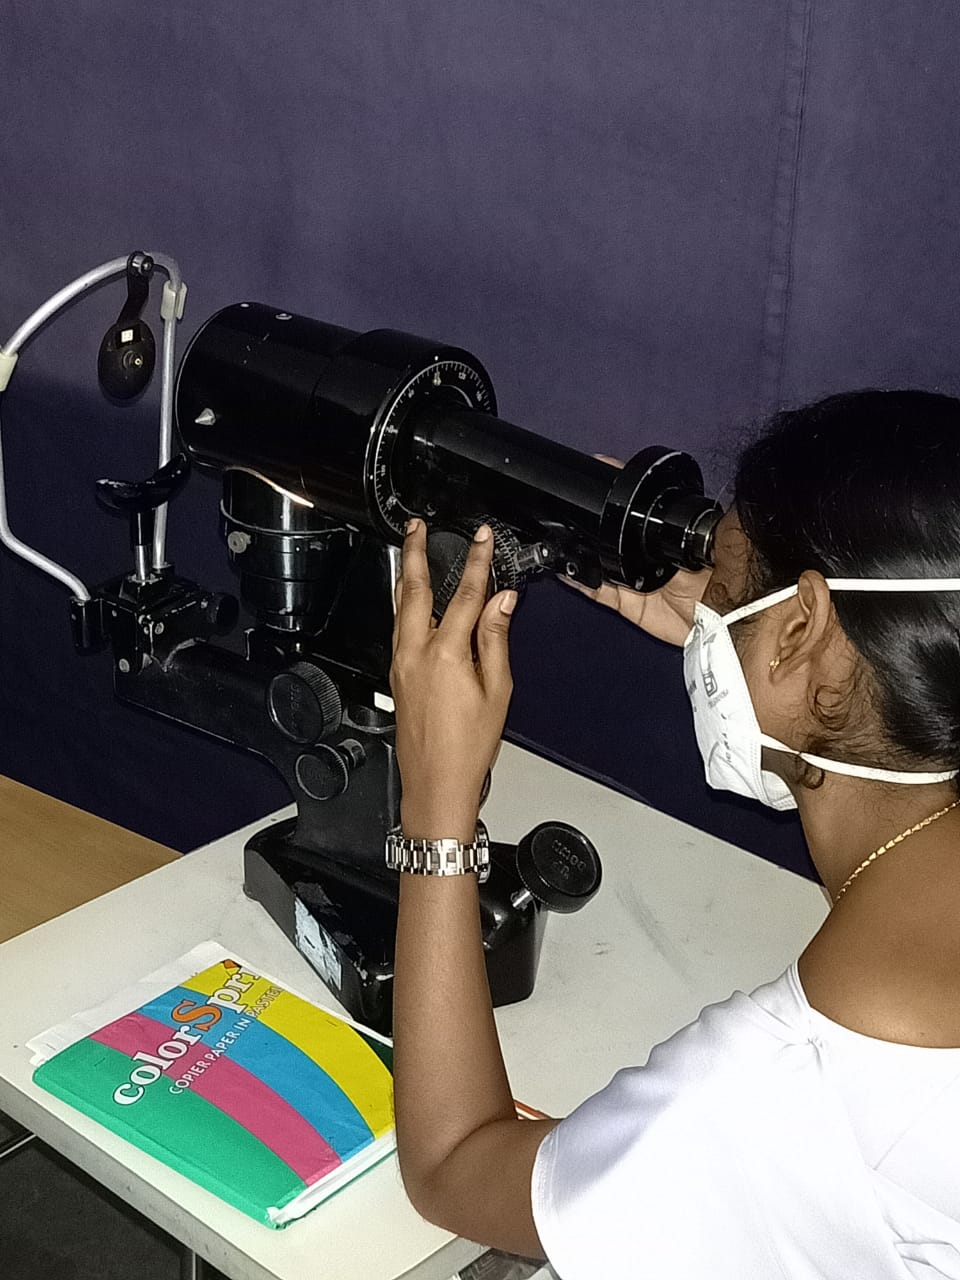 Digital image depicting a mid-level ophthalmic personnel doing alignment on the Bausch and Lomb keratometer